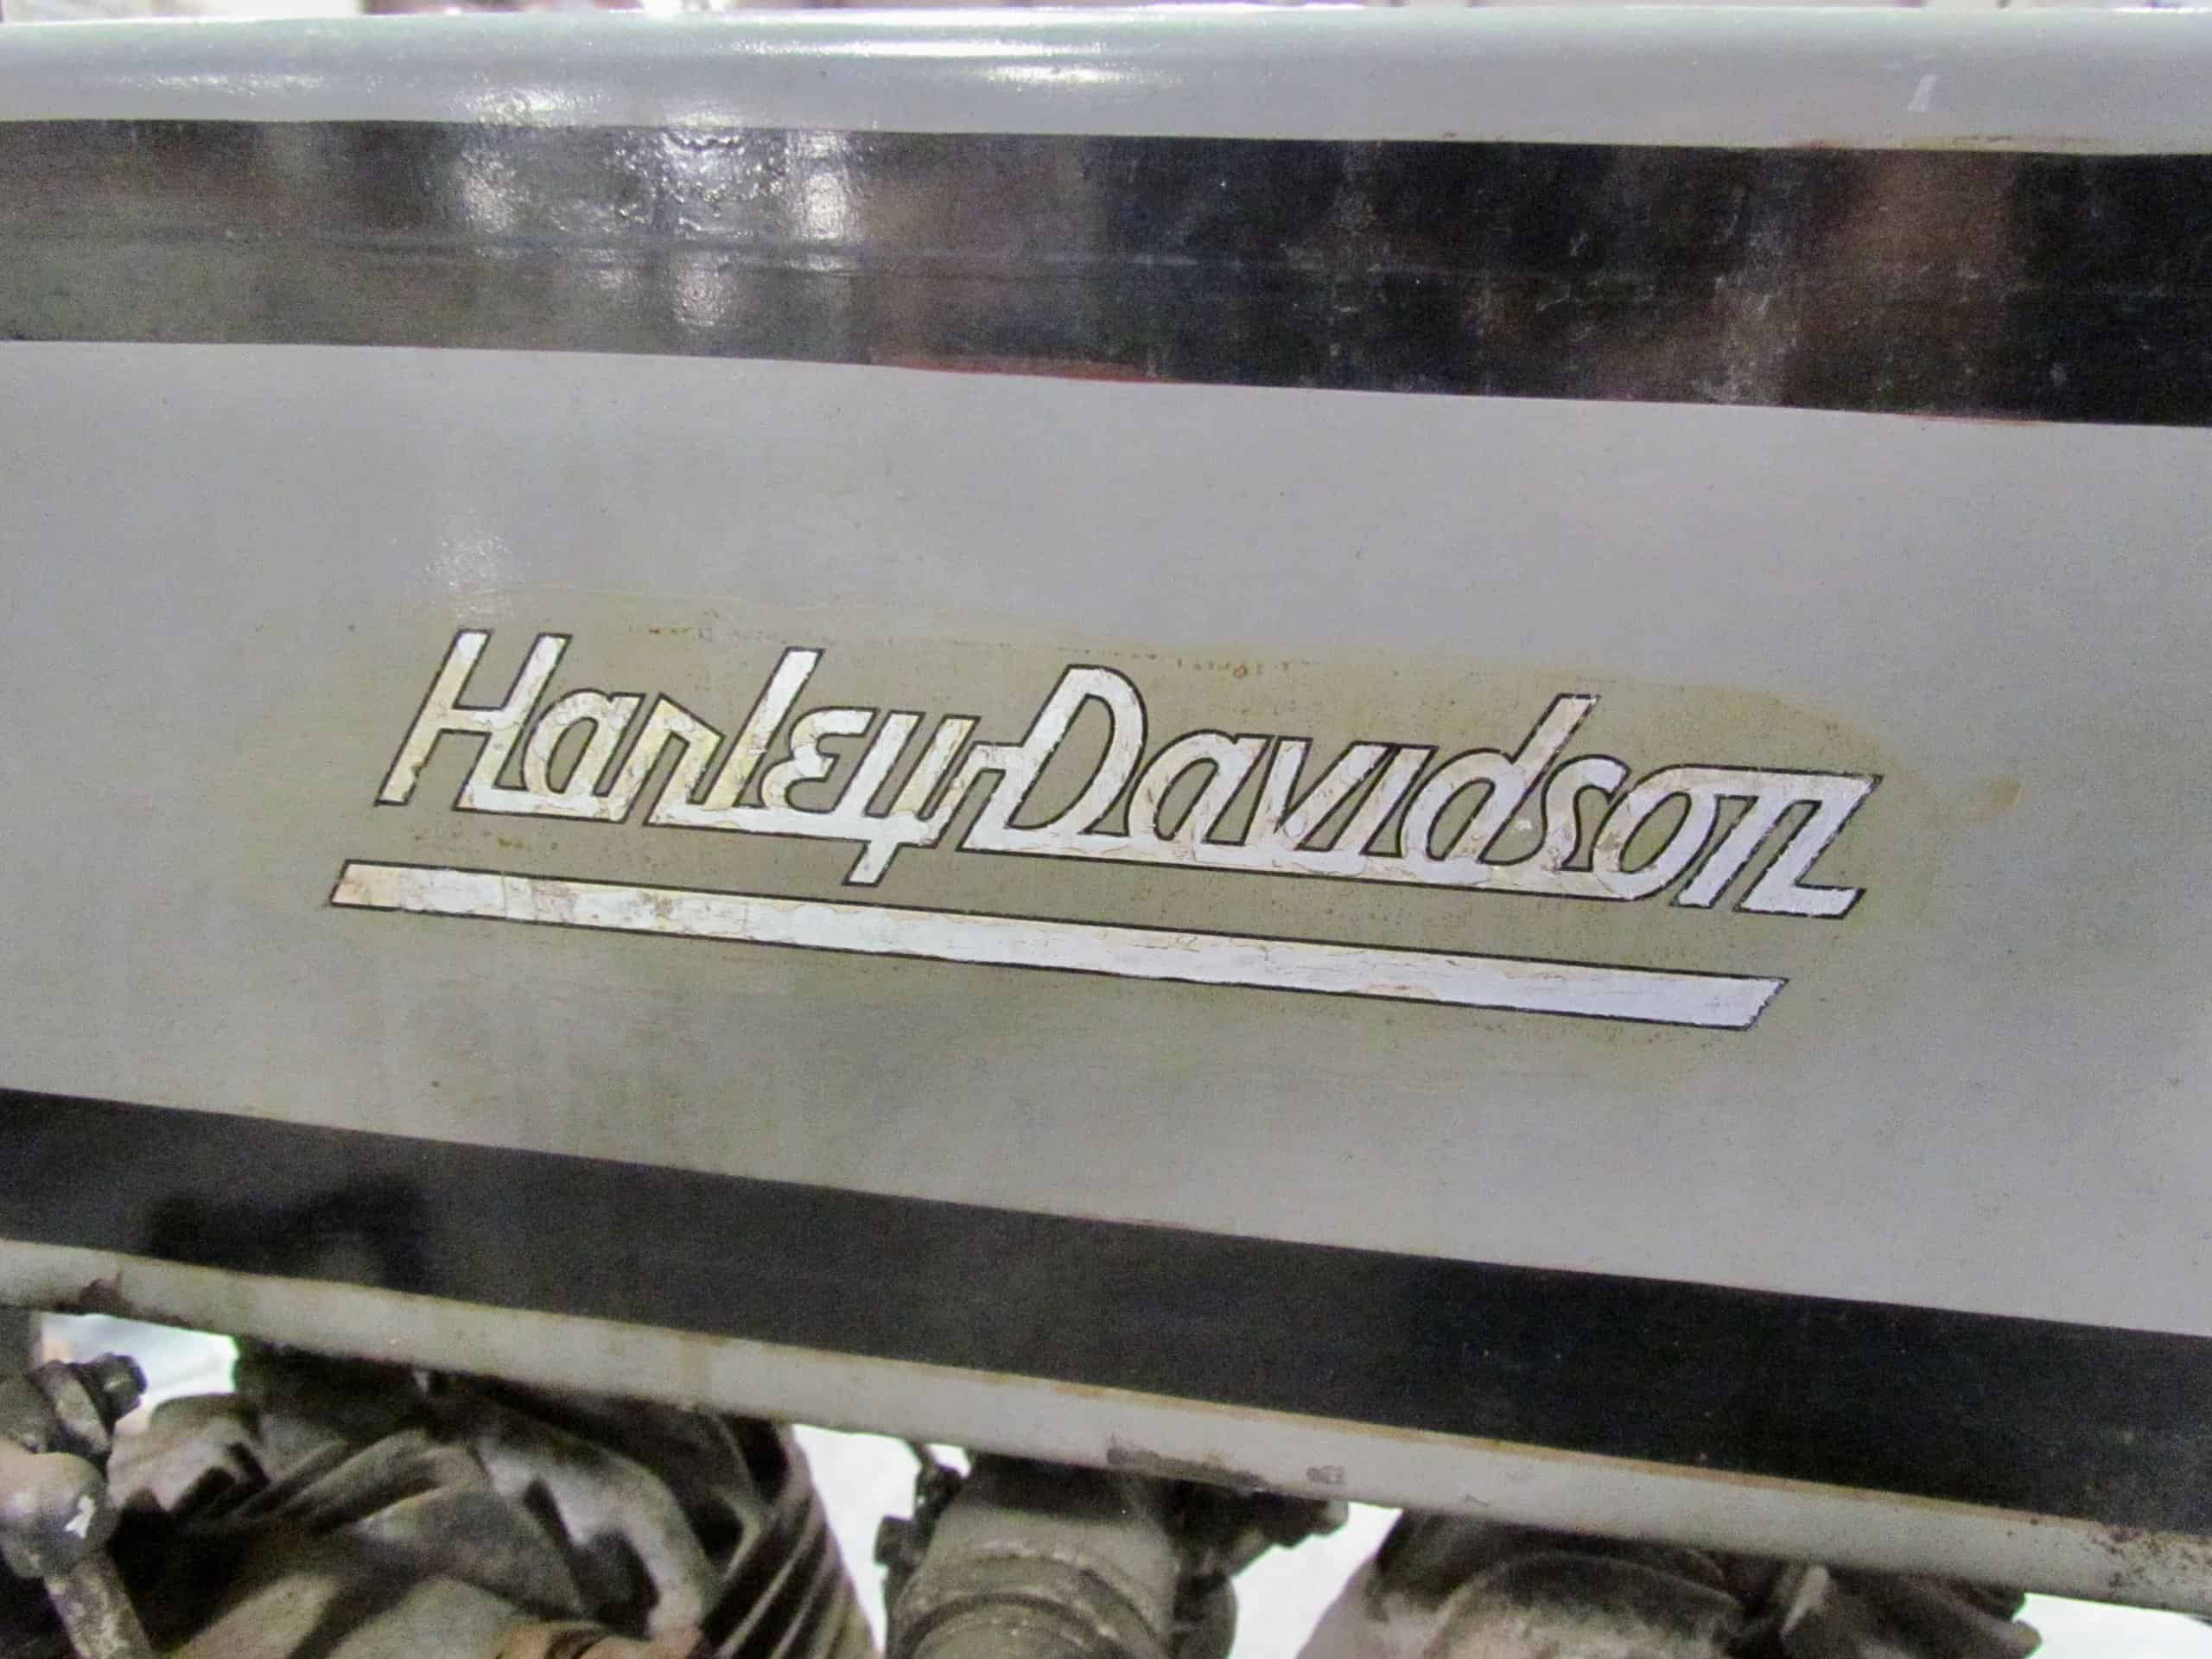 Harley-Davidson, Branding iron: Harley opts for variety, ClassicCars.com Journal